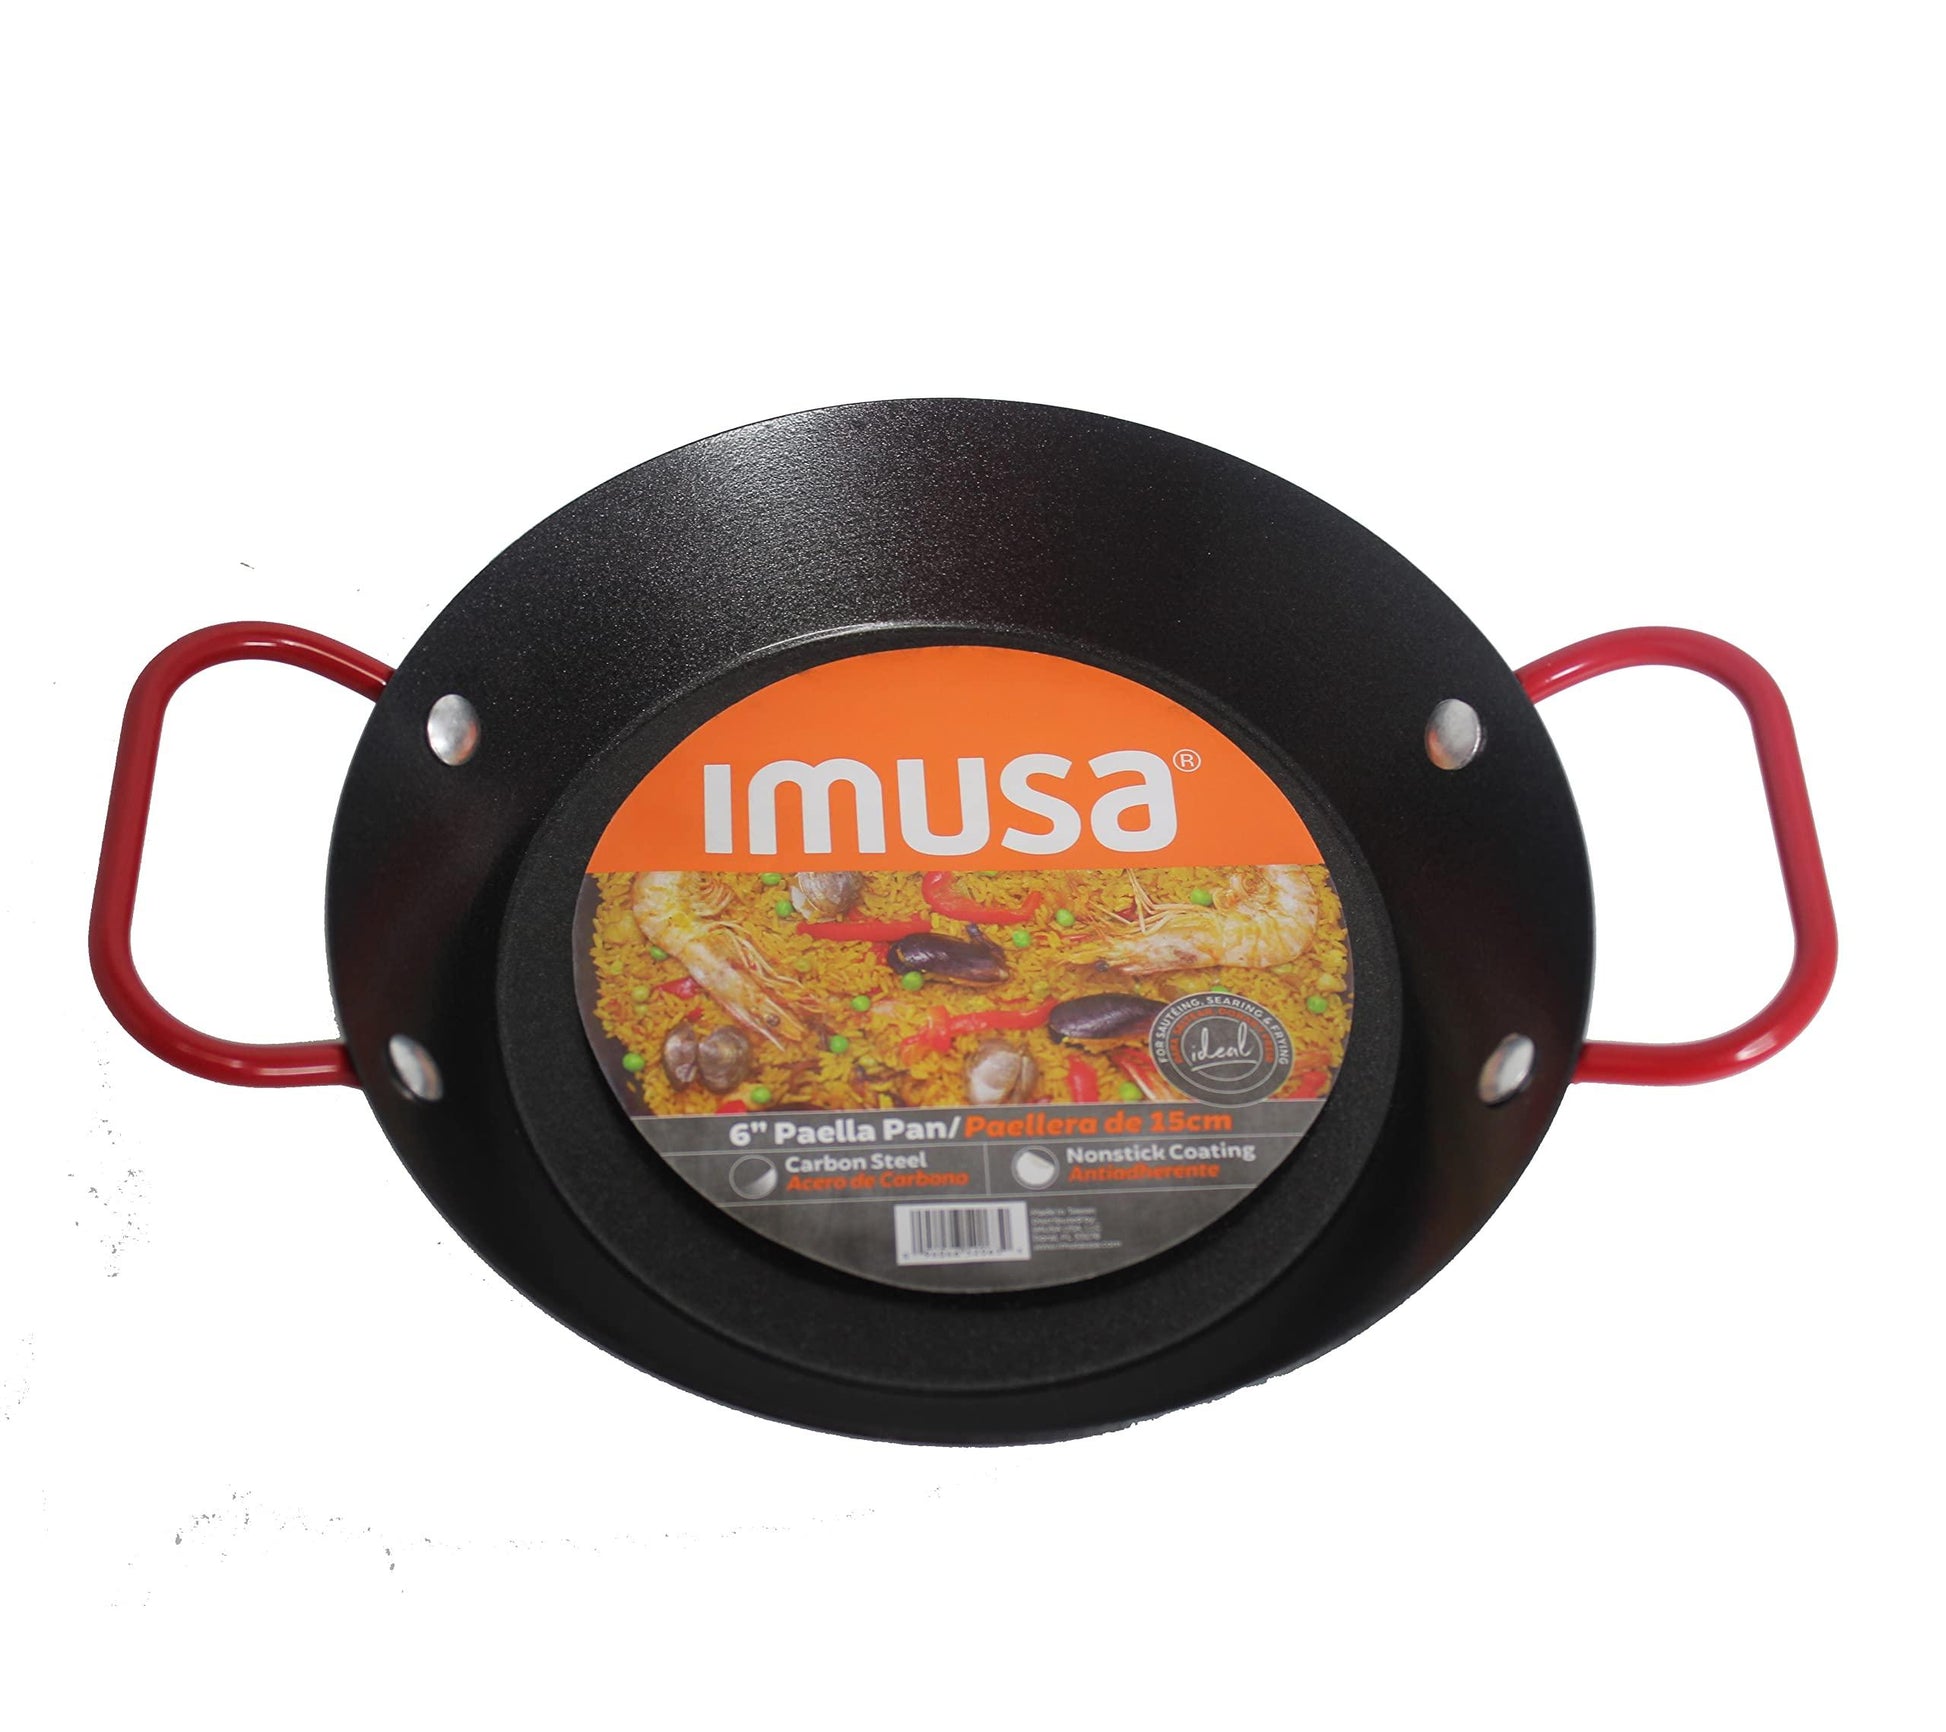 IMUSA USA Paella Pan, 6", Black with Red Handles - CookCave